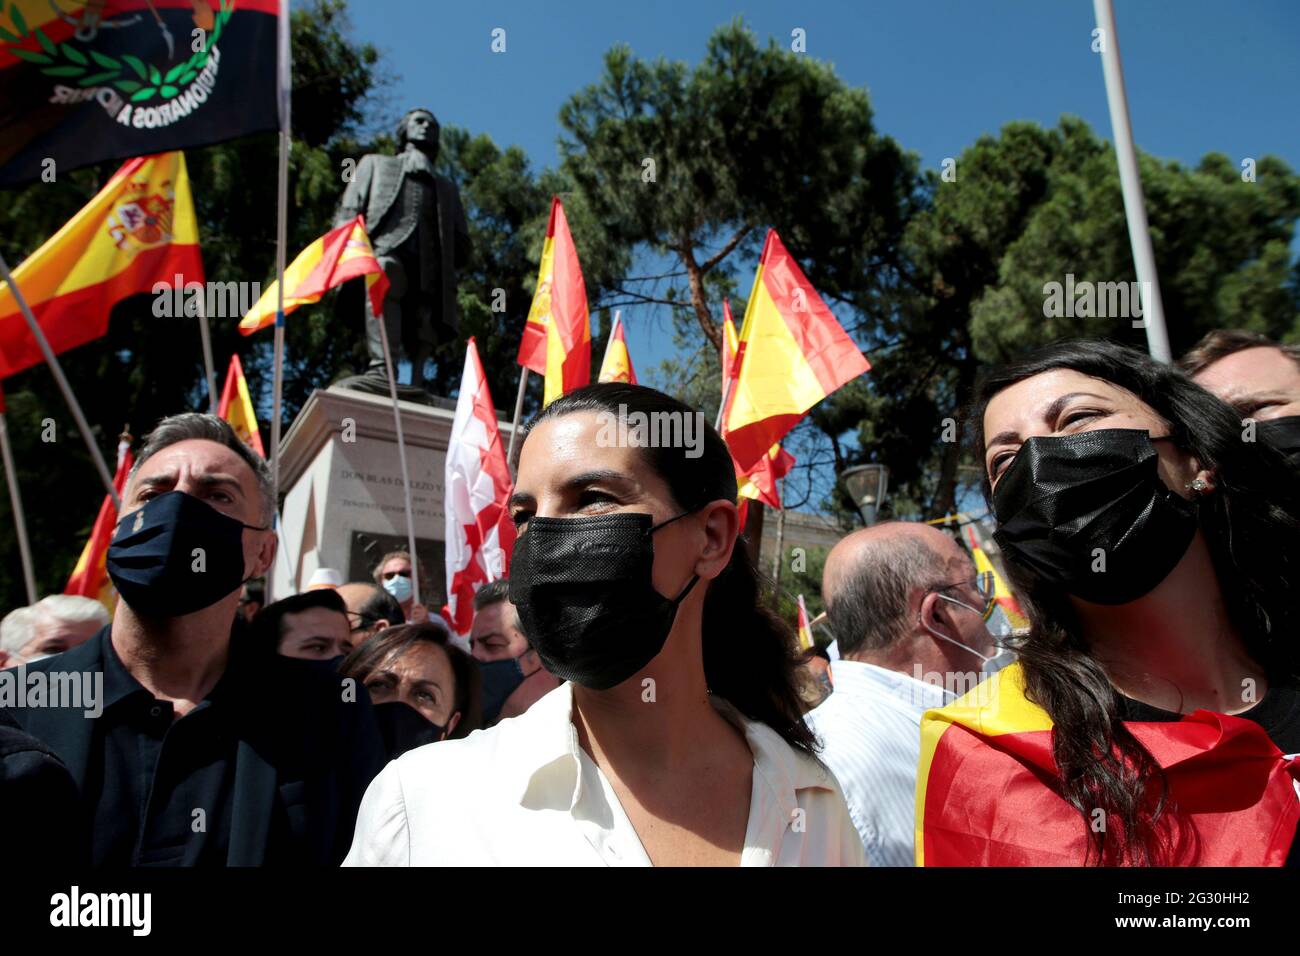 Madrid, Spain; 13.06.2021.- Rocío Monasterio (L), deputy of the extreme right party Vox at the monument to the Spanish admiral Blas de Lezo, who was one-eyed, lame and one-eyed. 'Unión 78' platform led by the Spanish politician Rosa Díez, the group that convened the meeting of the far-right in the Plaza de Colón in Madrid, to protest the possible pardons to the imprisoned Catalan independence politicians. Among thousands of people who filled the square and the adjacent streets with Spanish flags, the attendees shouted slogans such as 'Madrid will be the tomb of Sanchismo' by the president of S Stock Photo